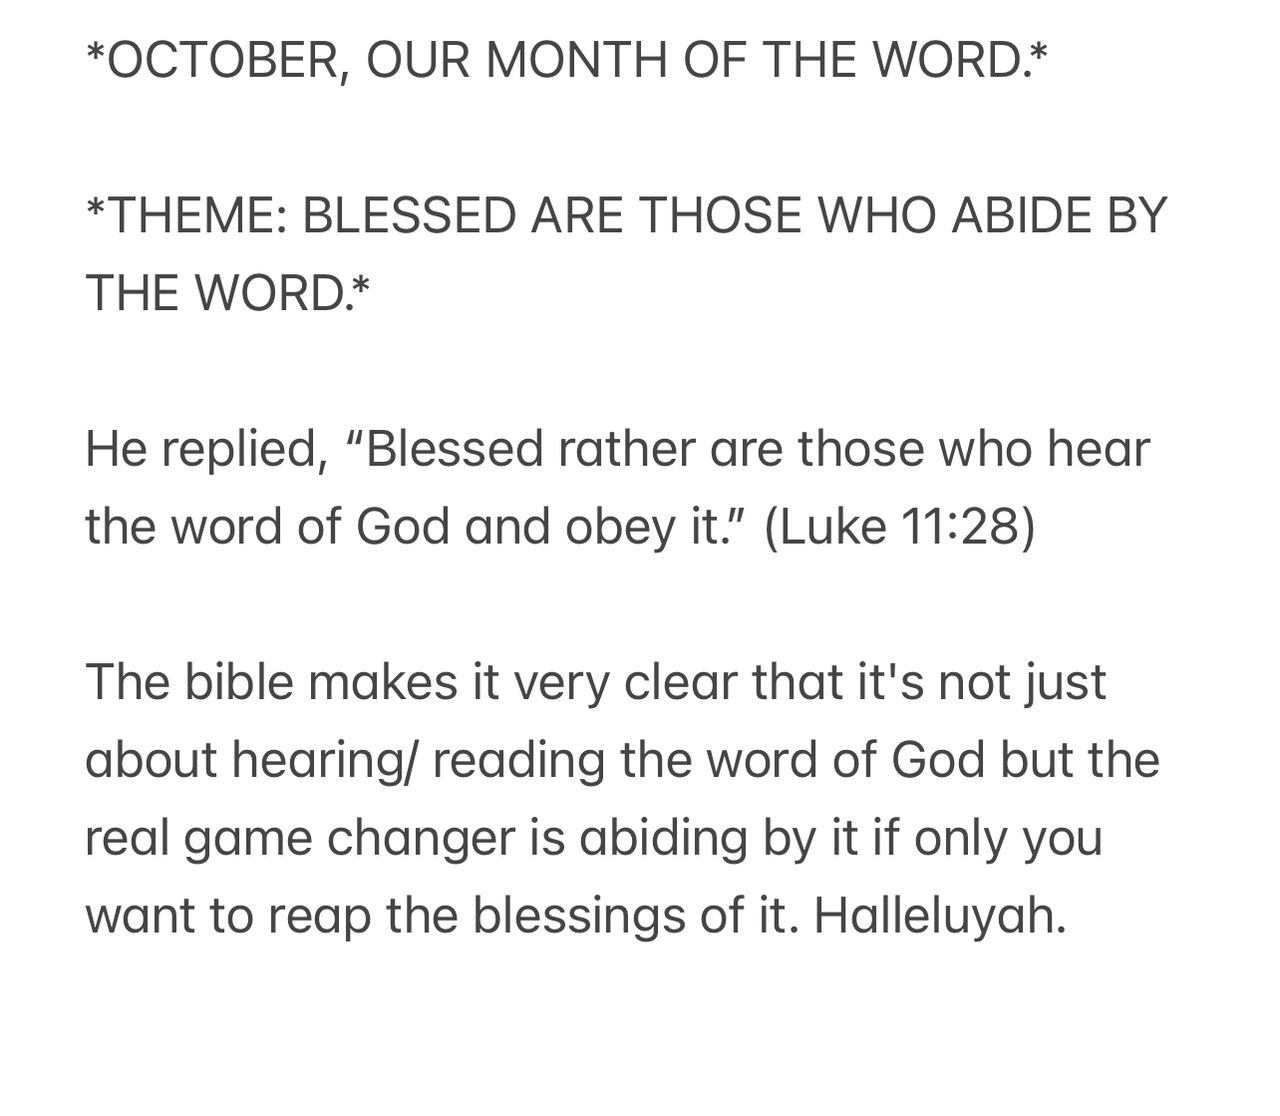 BLESSED ARE THOSE WHO ABIDE BY THE WORD.